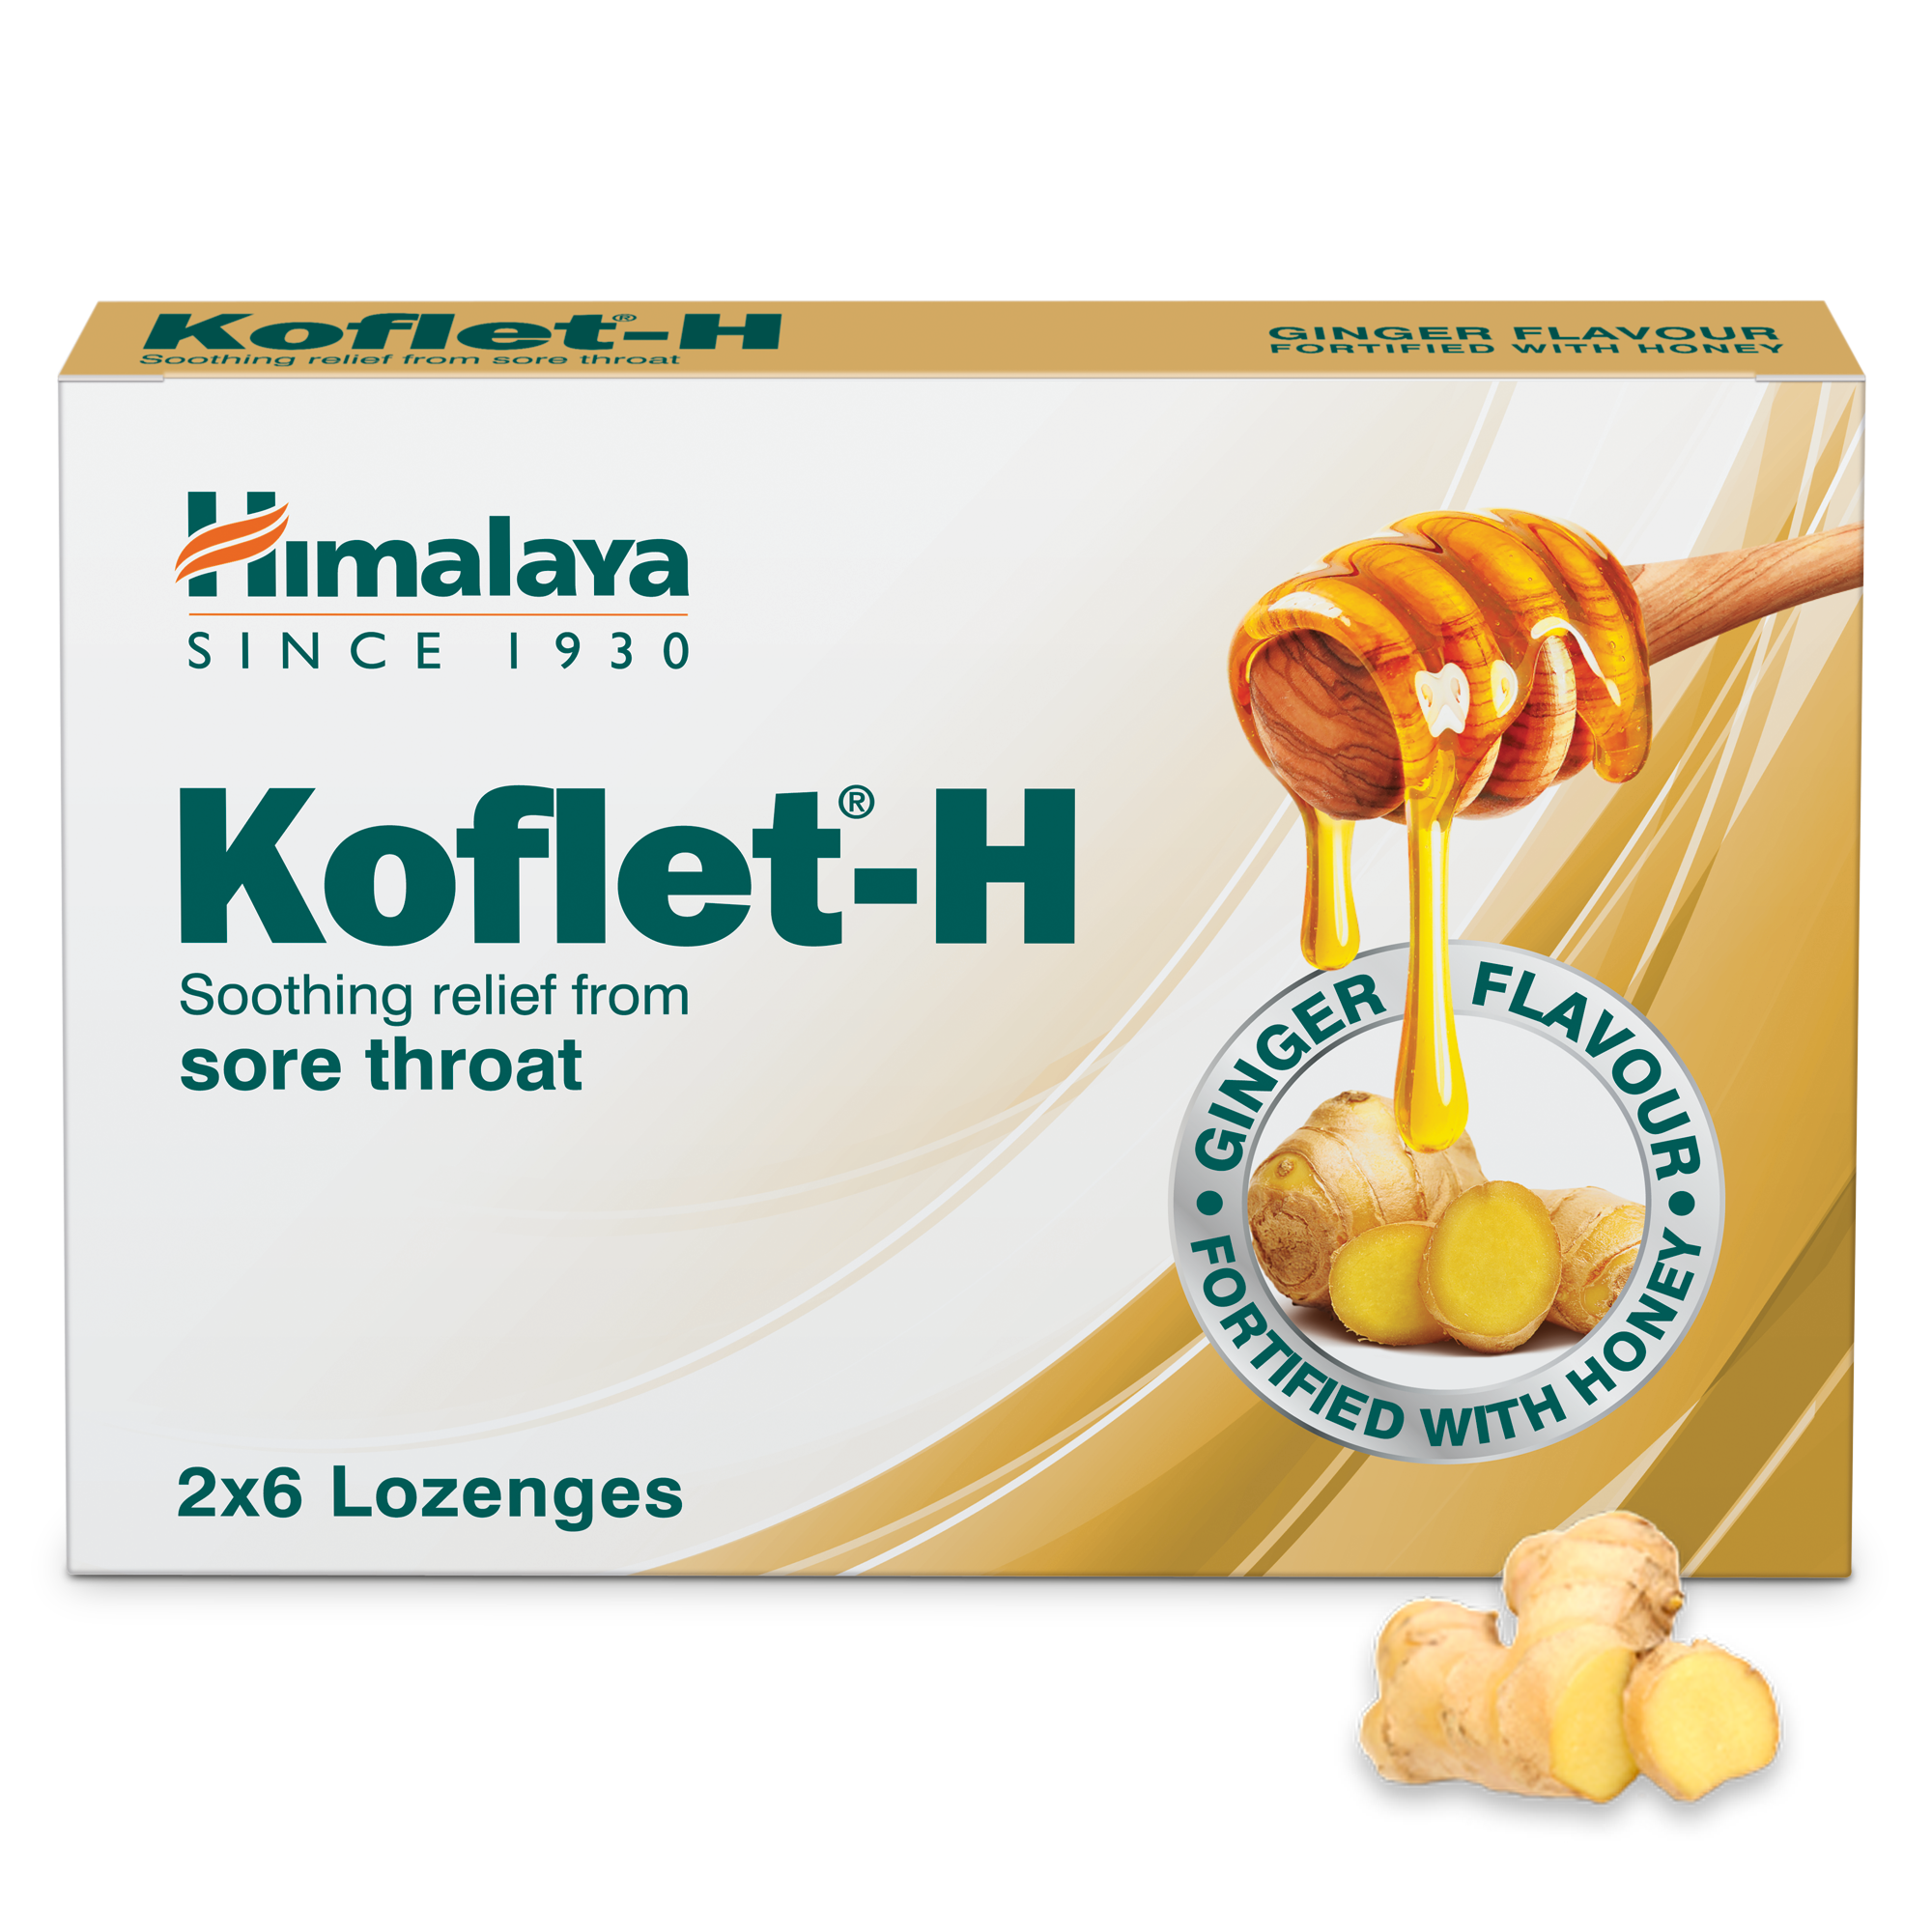 Himalaya Koflet H Lozenges Ginger 12's - Relief from Sore Throat